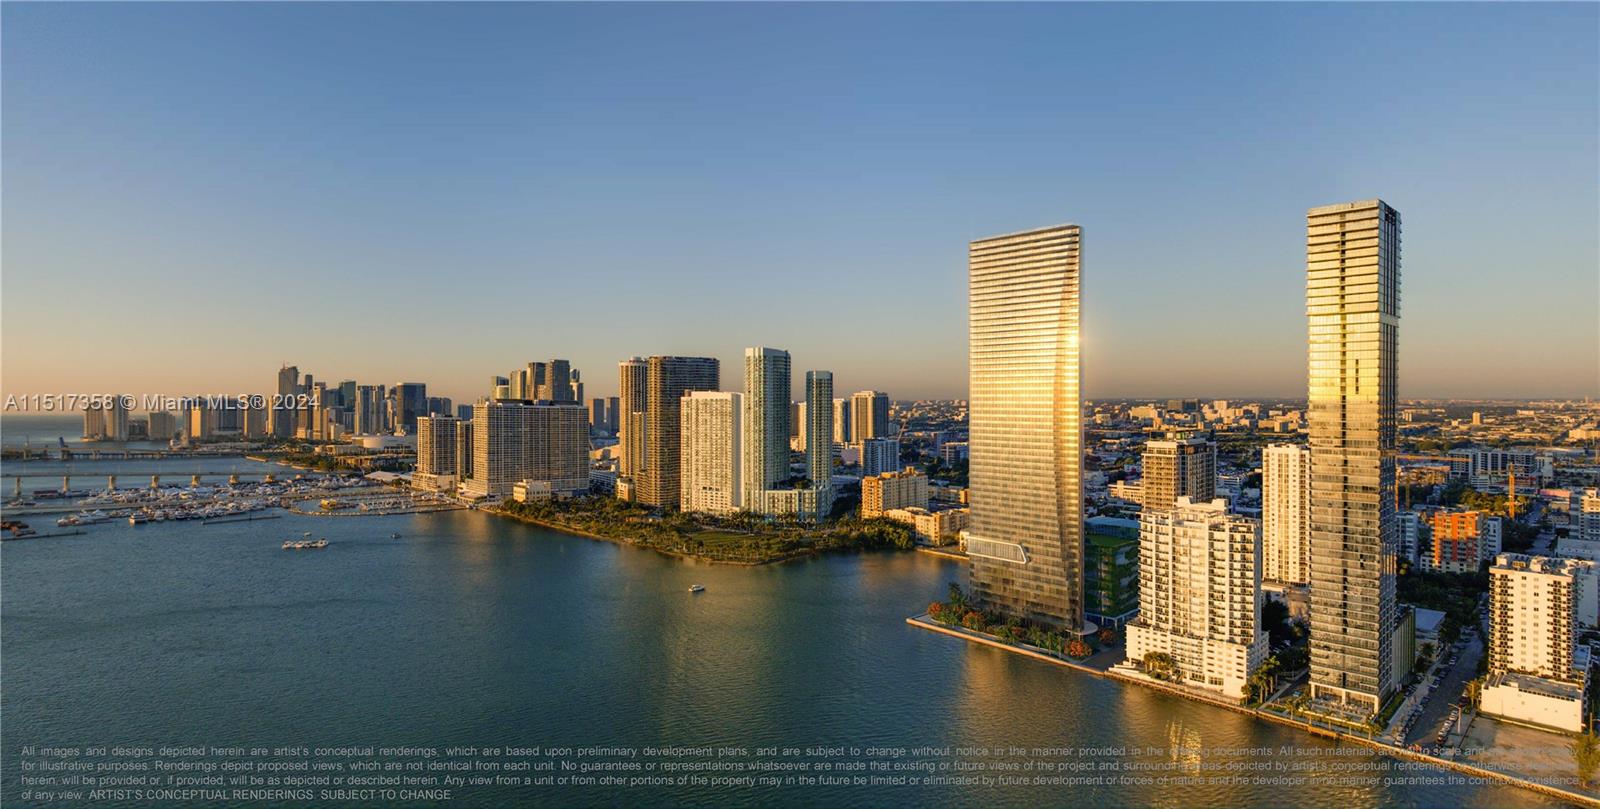 Edition Residences, Miami Edgewater is an ode to Miami and commitment to a new way of living in one of the world’s most magical cities.  Redefining sophisticated living in Miami, our signature blend of authentic design and personalized service, delivered by our dedicated team, ensures residents are able to live the bespoke Edition lifestyle without ever leaving home.  
Designed by award winning architect Bernardo Fort-Brescia of Arquitectonica in service of discerning residents and their guests. Edition Residences, Miami Edgewater is a tranquil respite, encouraging relaxation, inspiration, and reflection amidst the vibrant city energy.